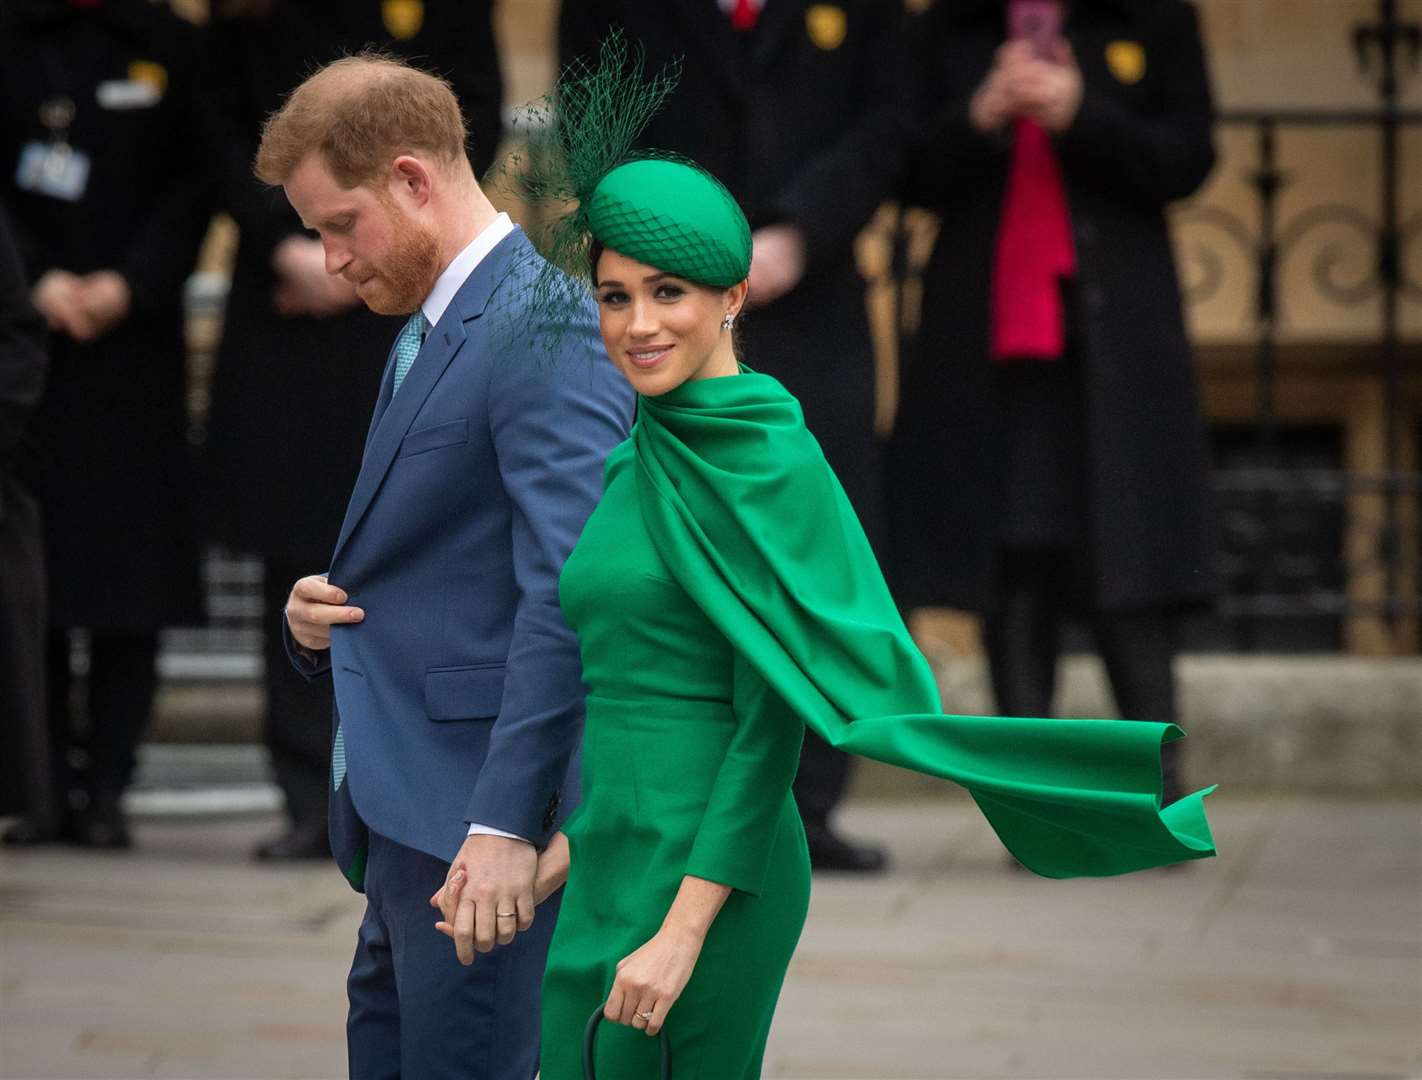 The Duke and Duchess of Sussex arrive at the Commonwealth Service at Westminster Abbey in 2020 (PA)